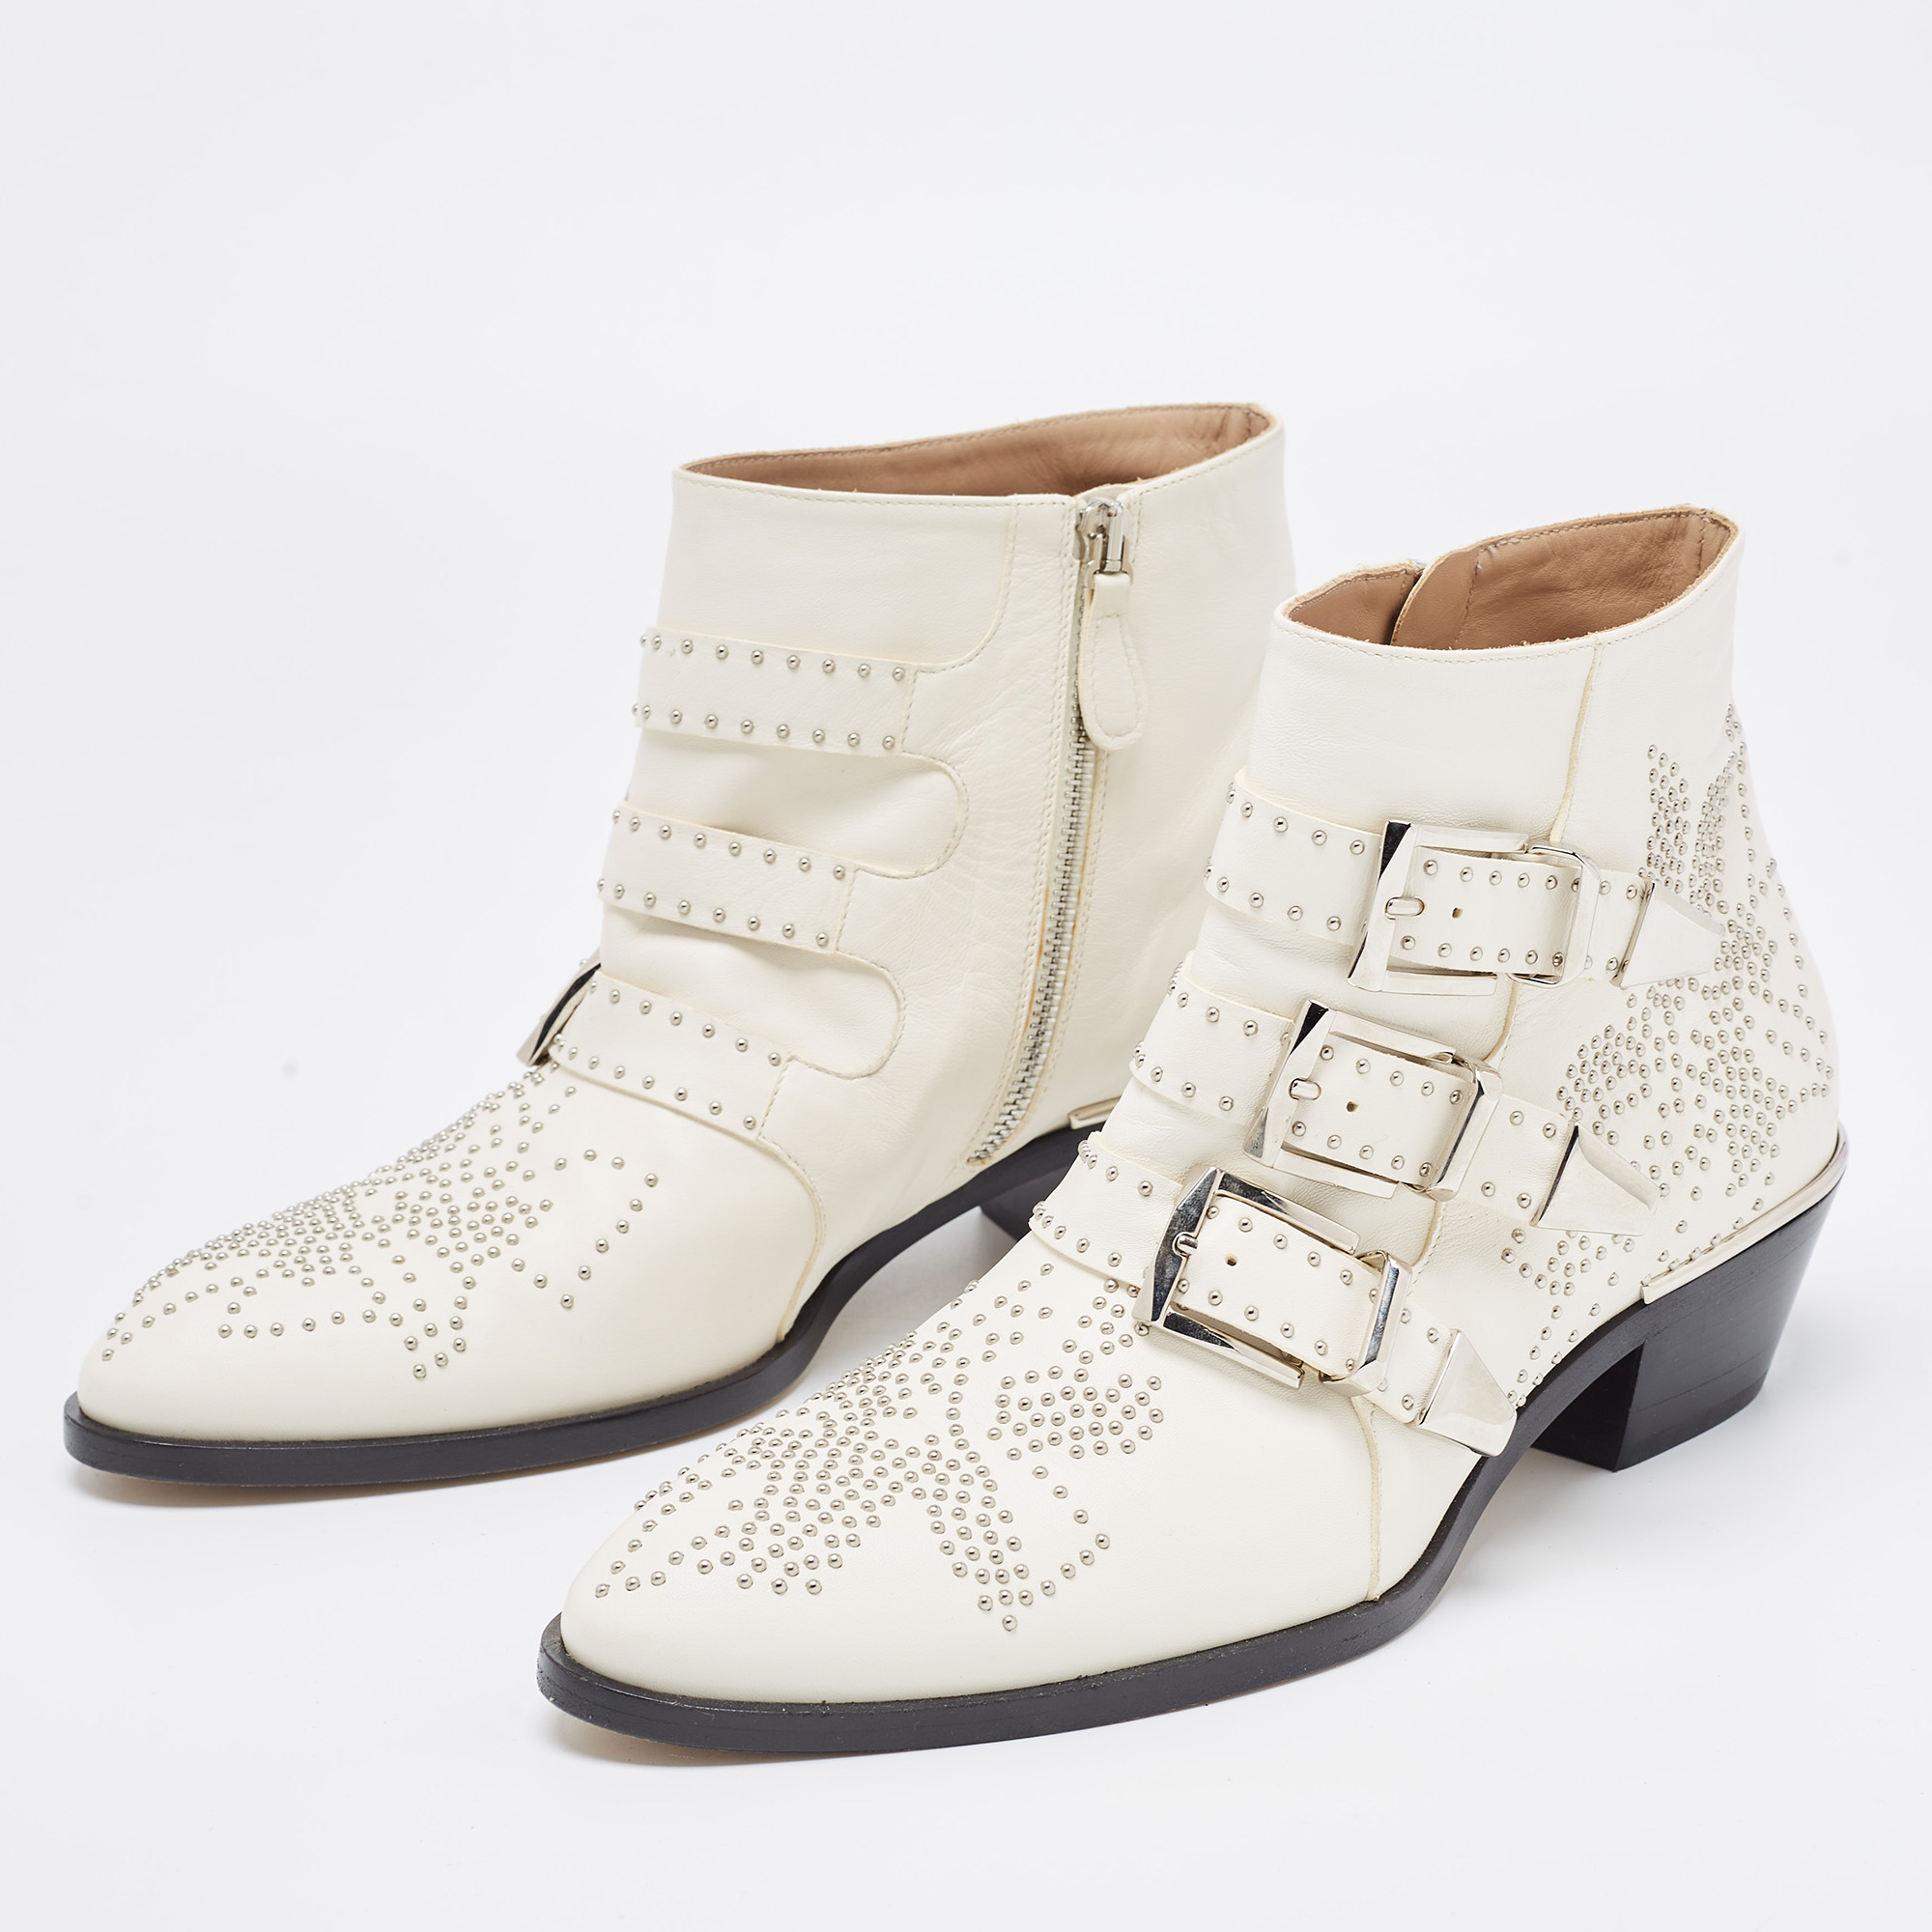 

Chloe White Studded Leather Susanna Ankle Boots Size